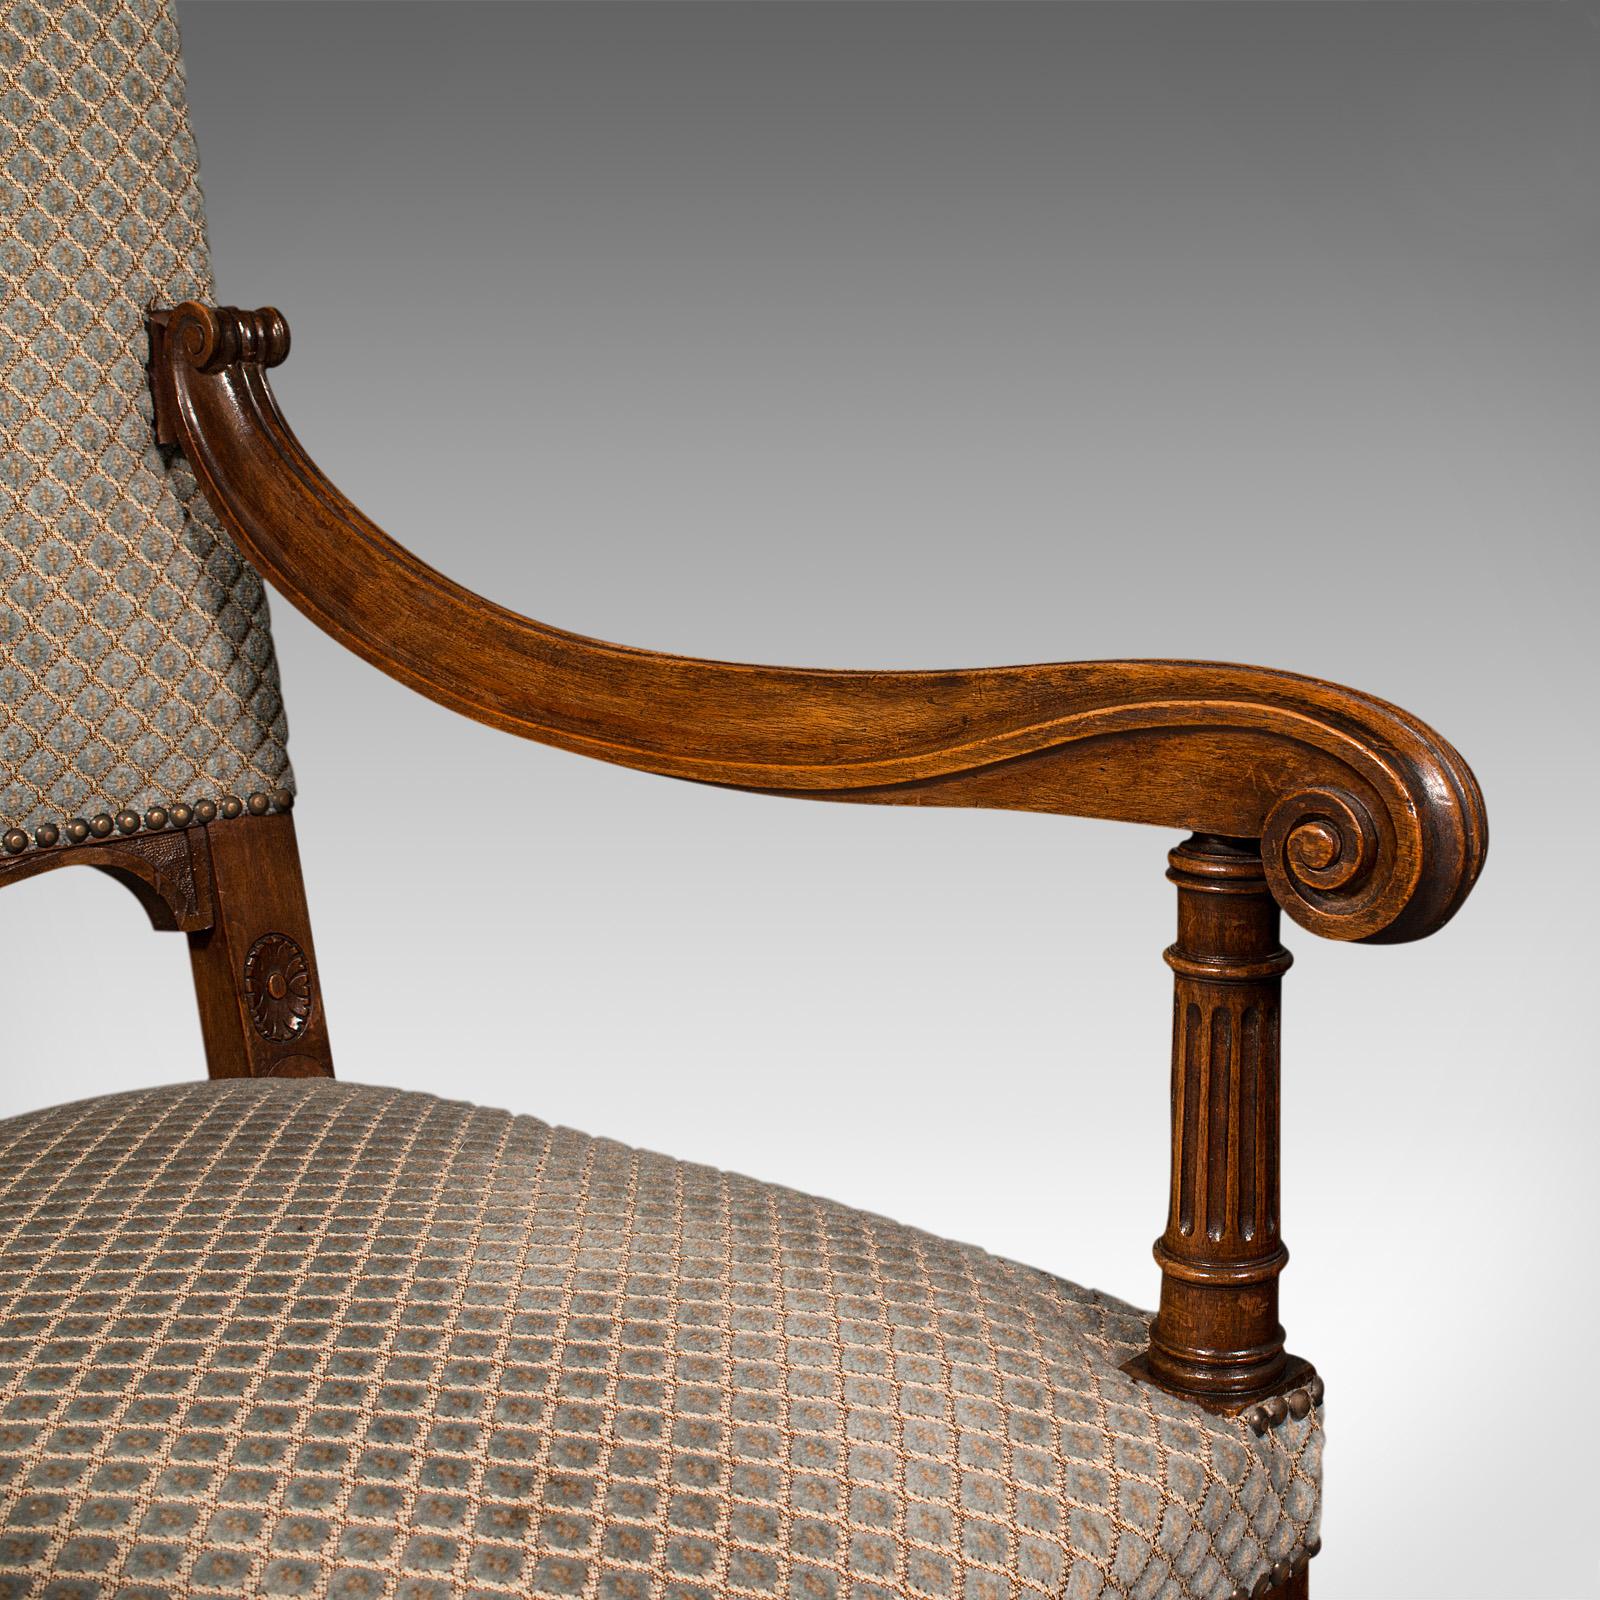 Set of 8 Antique Dining Chairs, English, Walnut, Carver, Seat, Edwardian, c.1910 For Sale 4